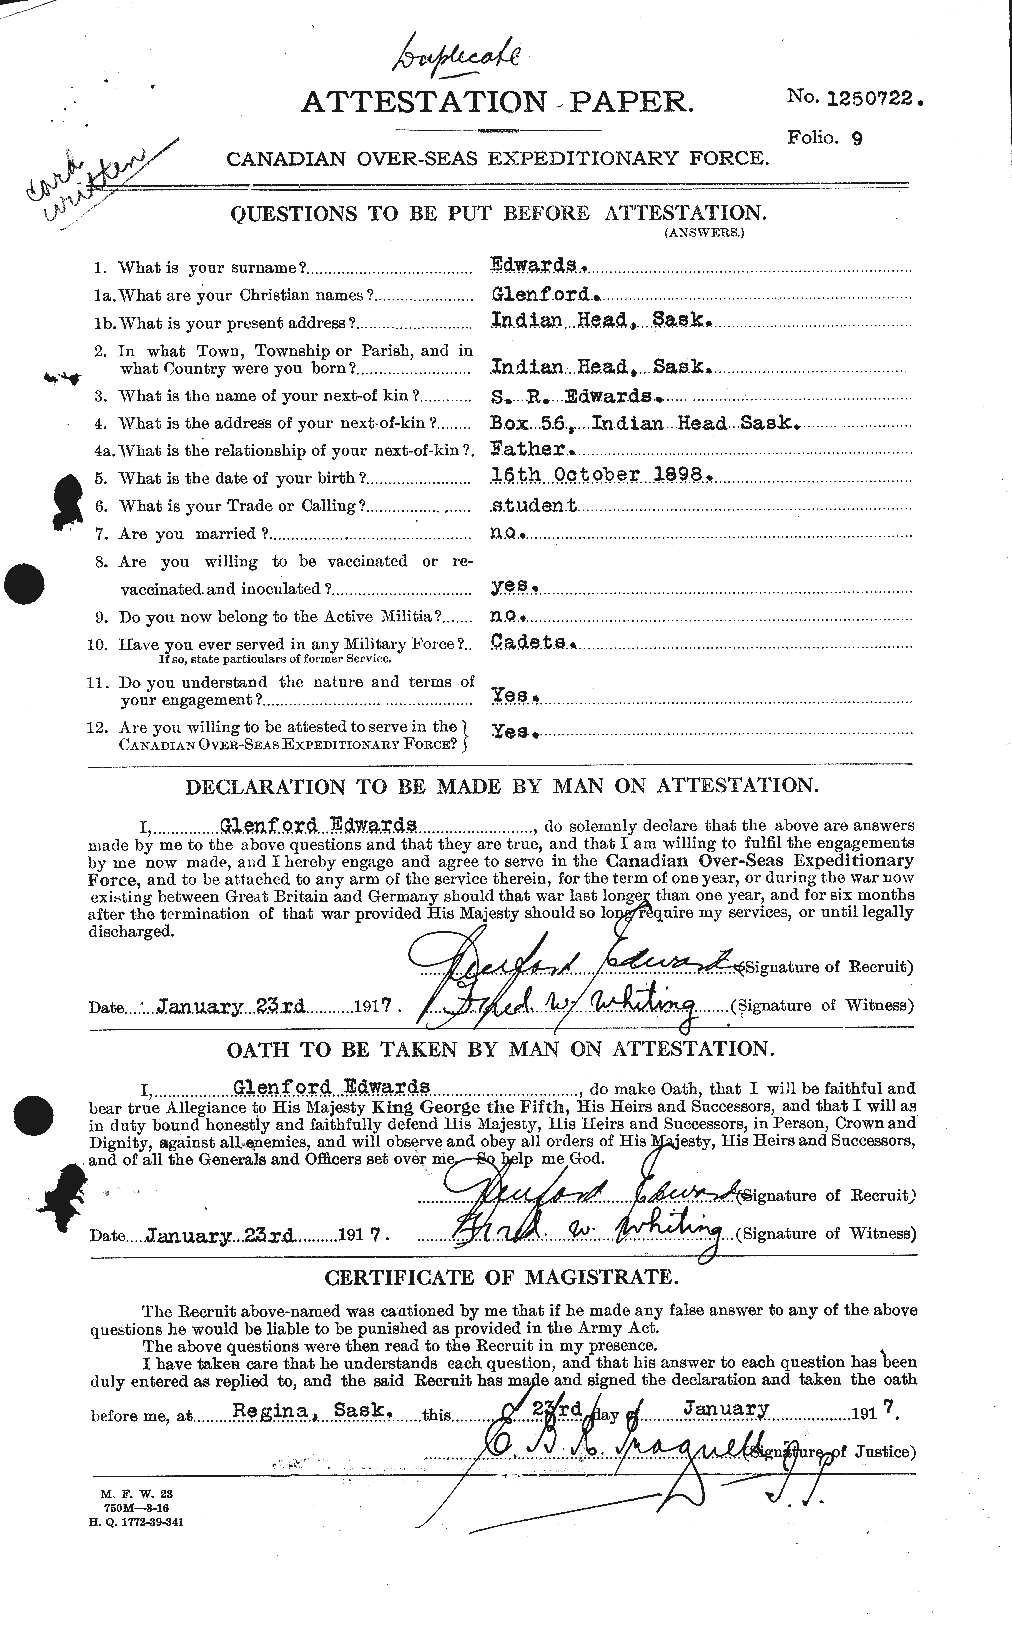 Personnel Records of the First World War - CEF 309703a